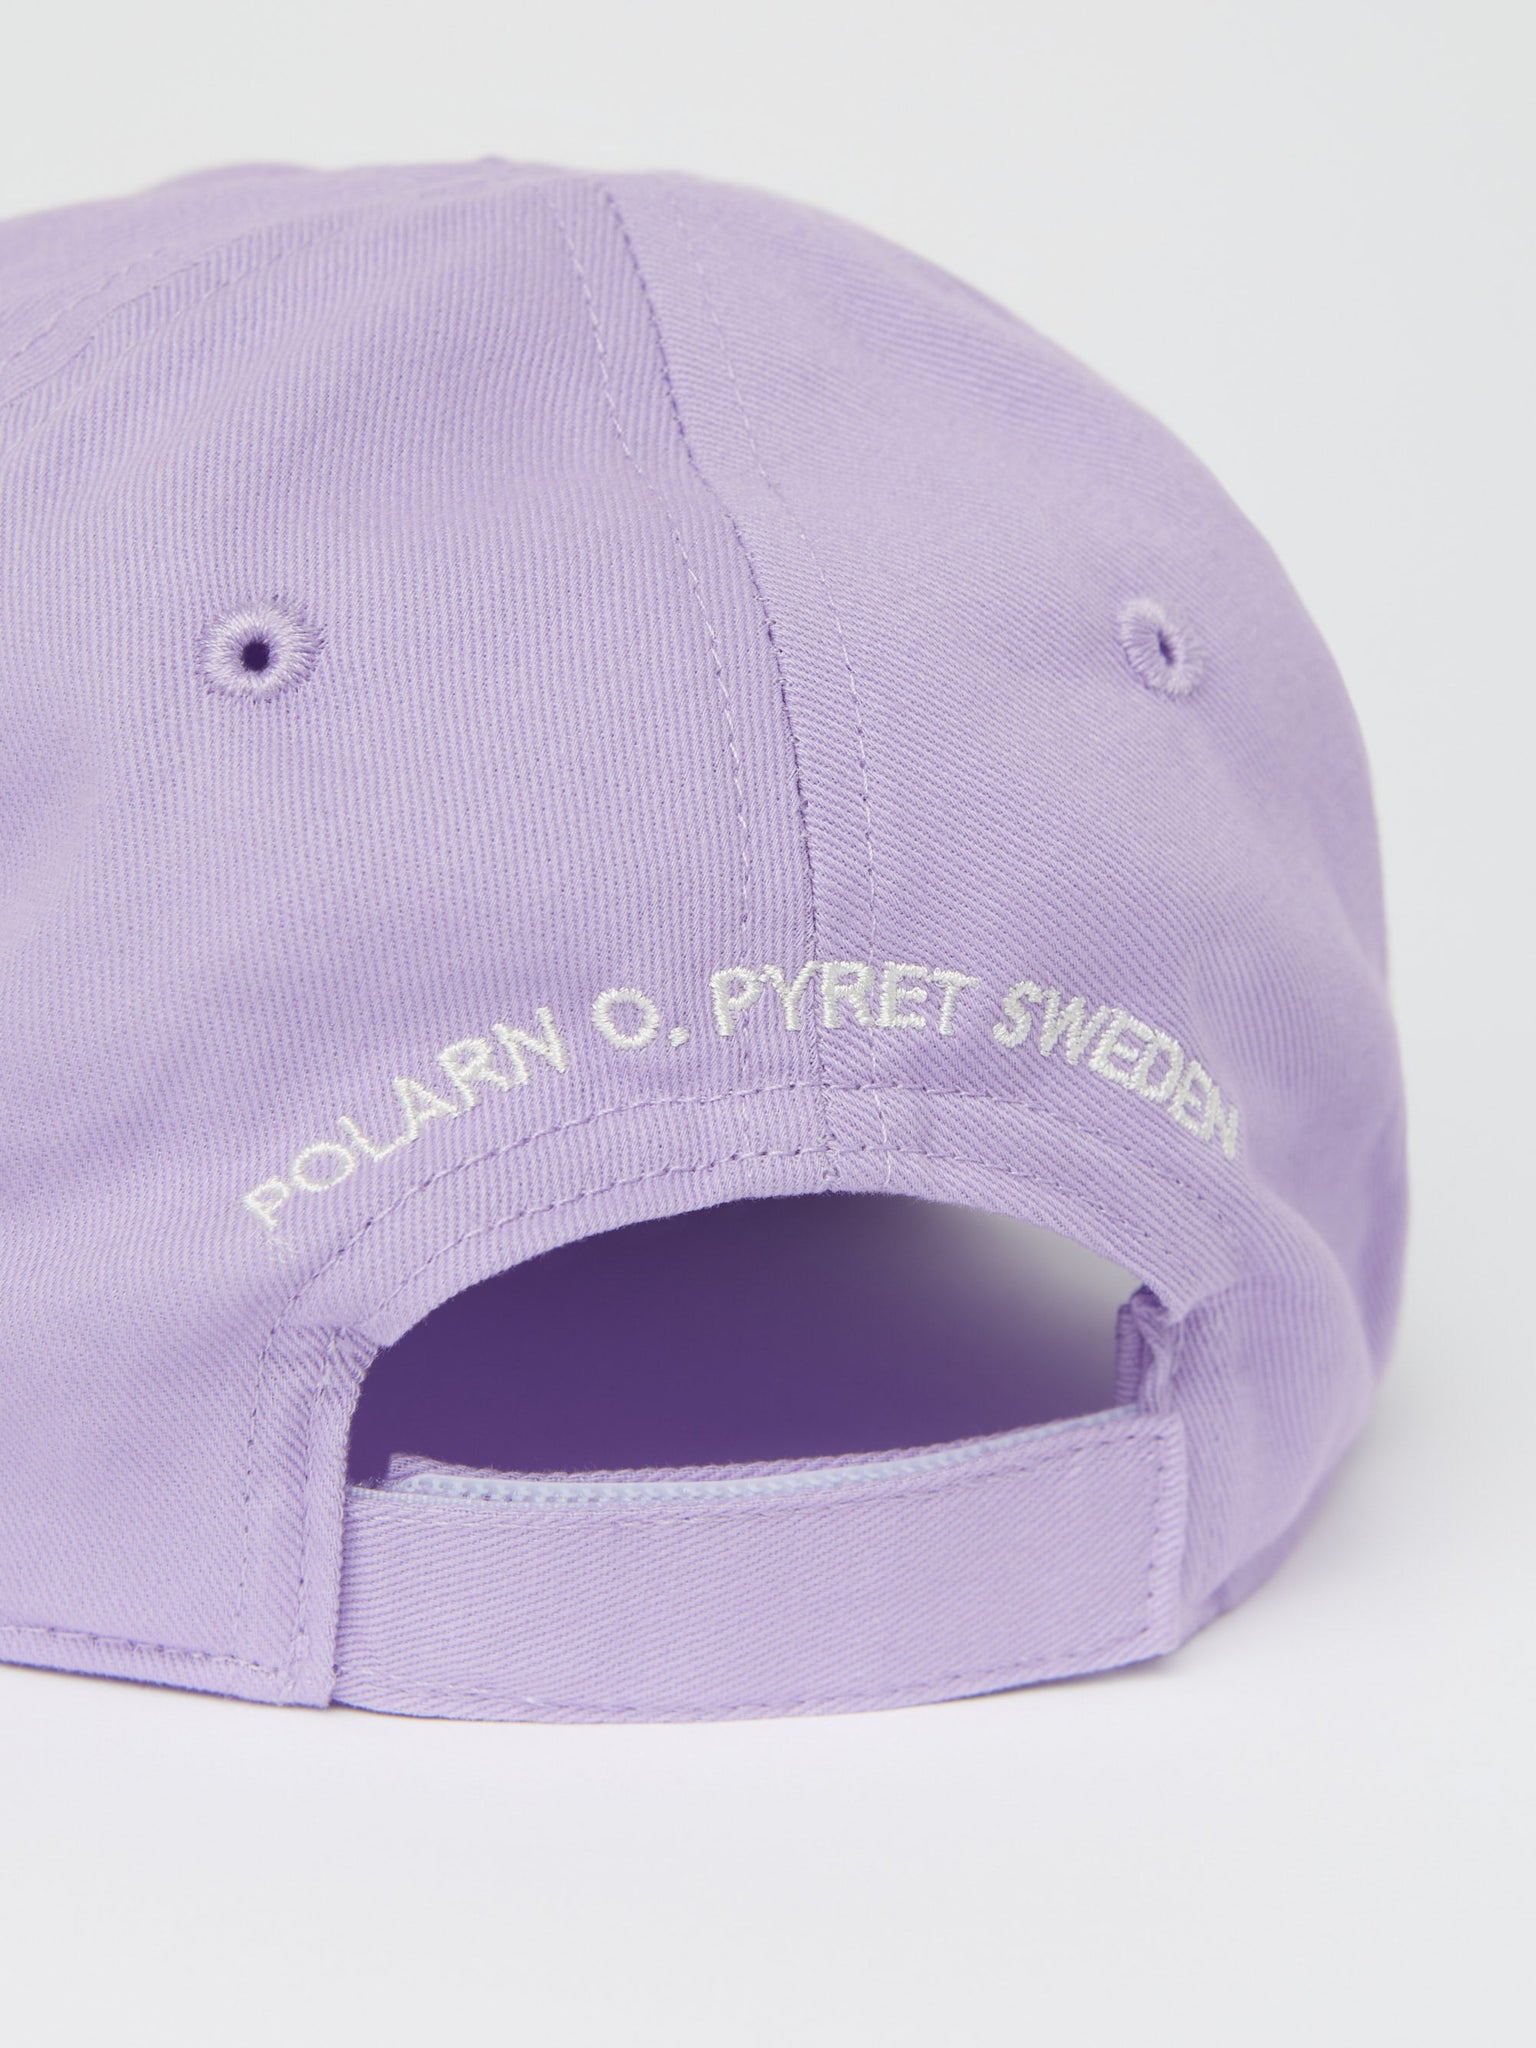 Kids Purple Cotton Cap from the Polarn O. Pyret kidswear collection. Quality kids clothing made to last.